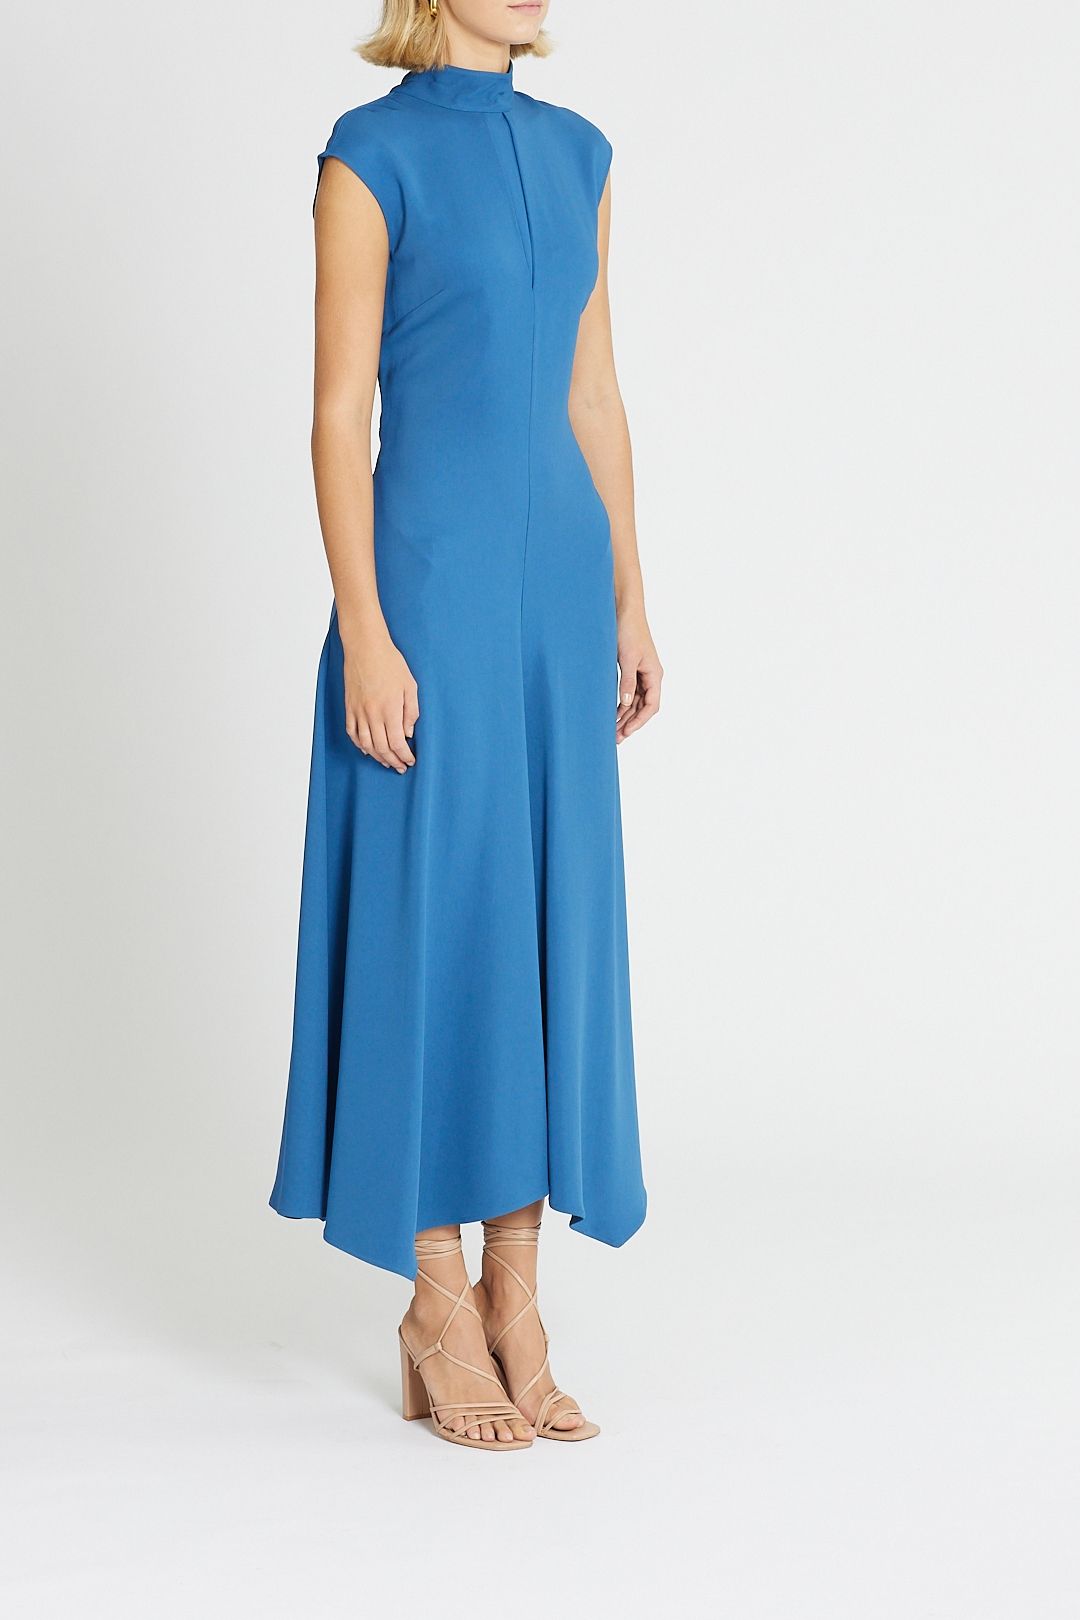 Reiss Livvy Open Back Midi Fit and Flare